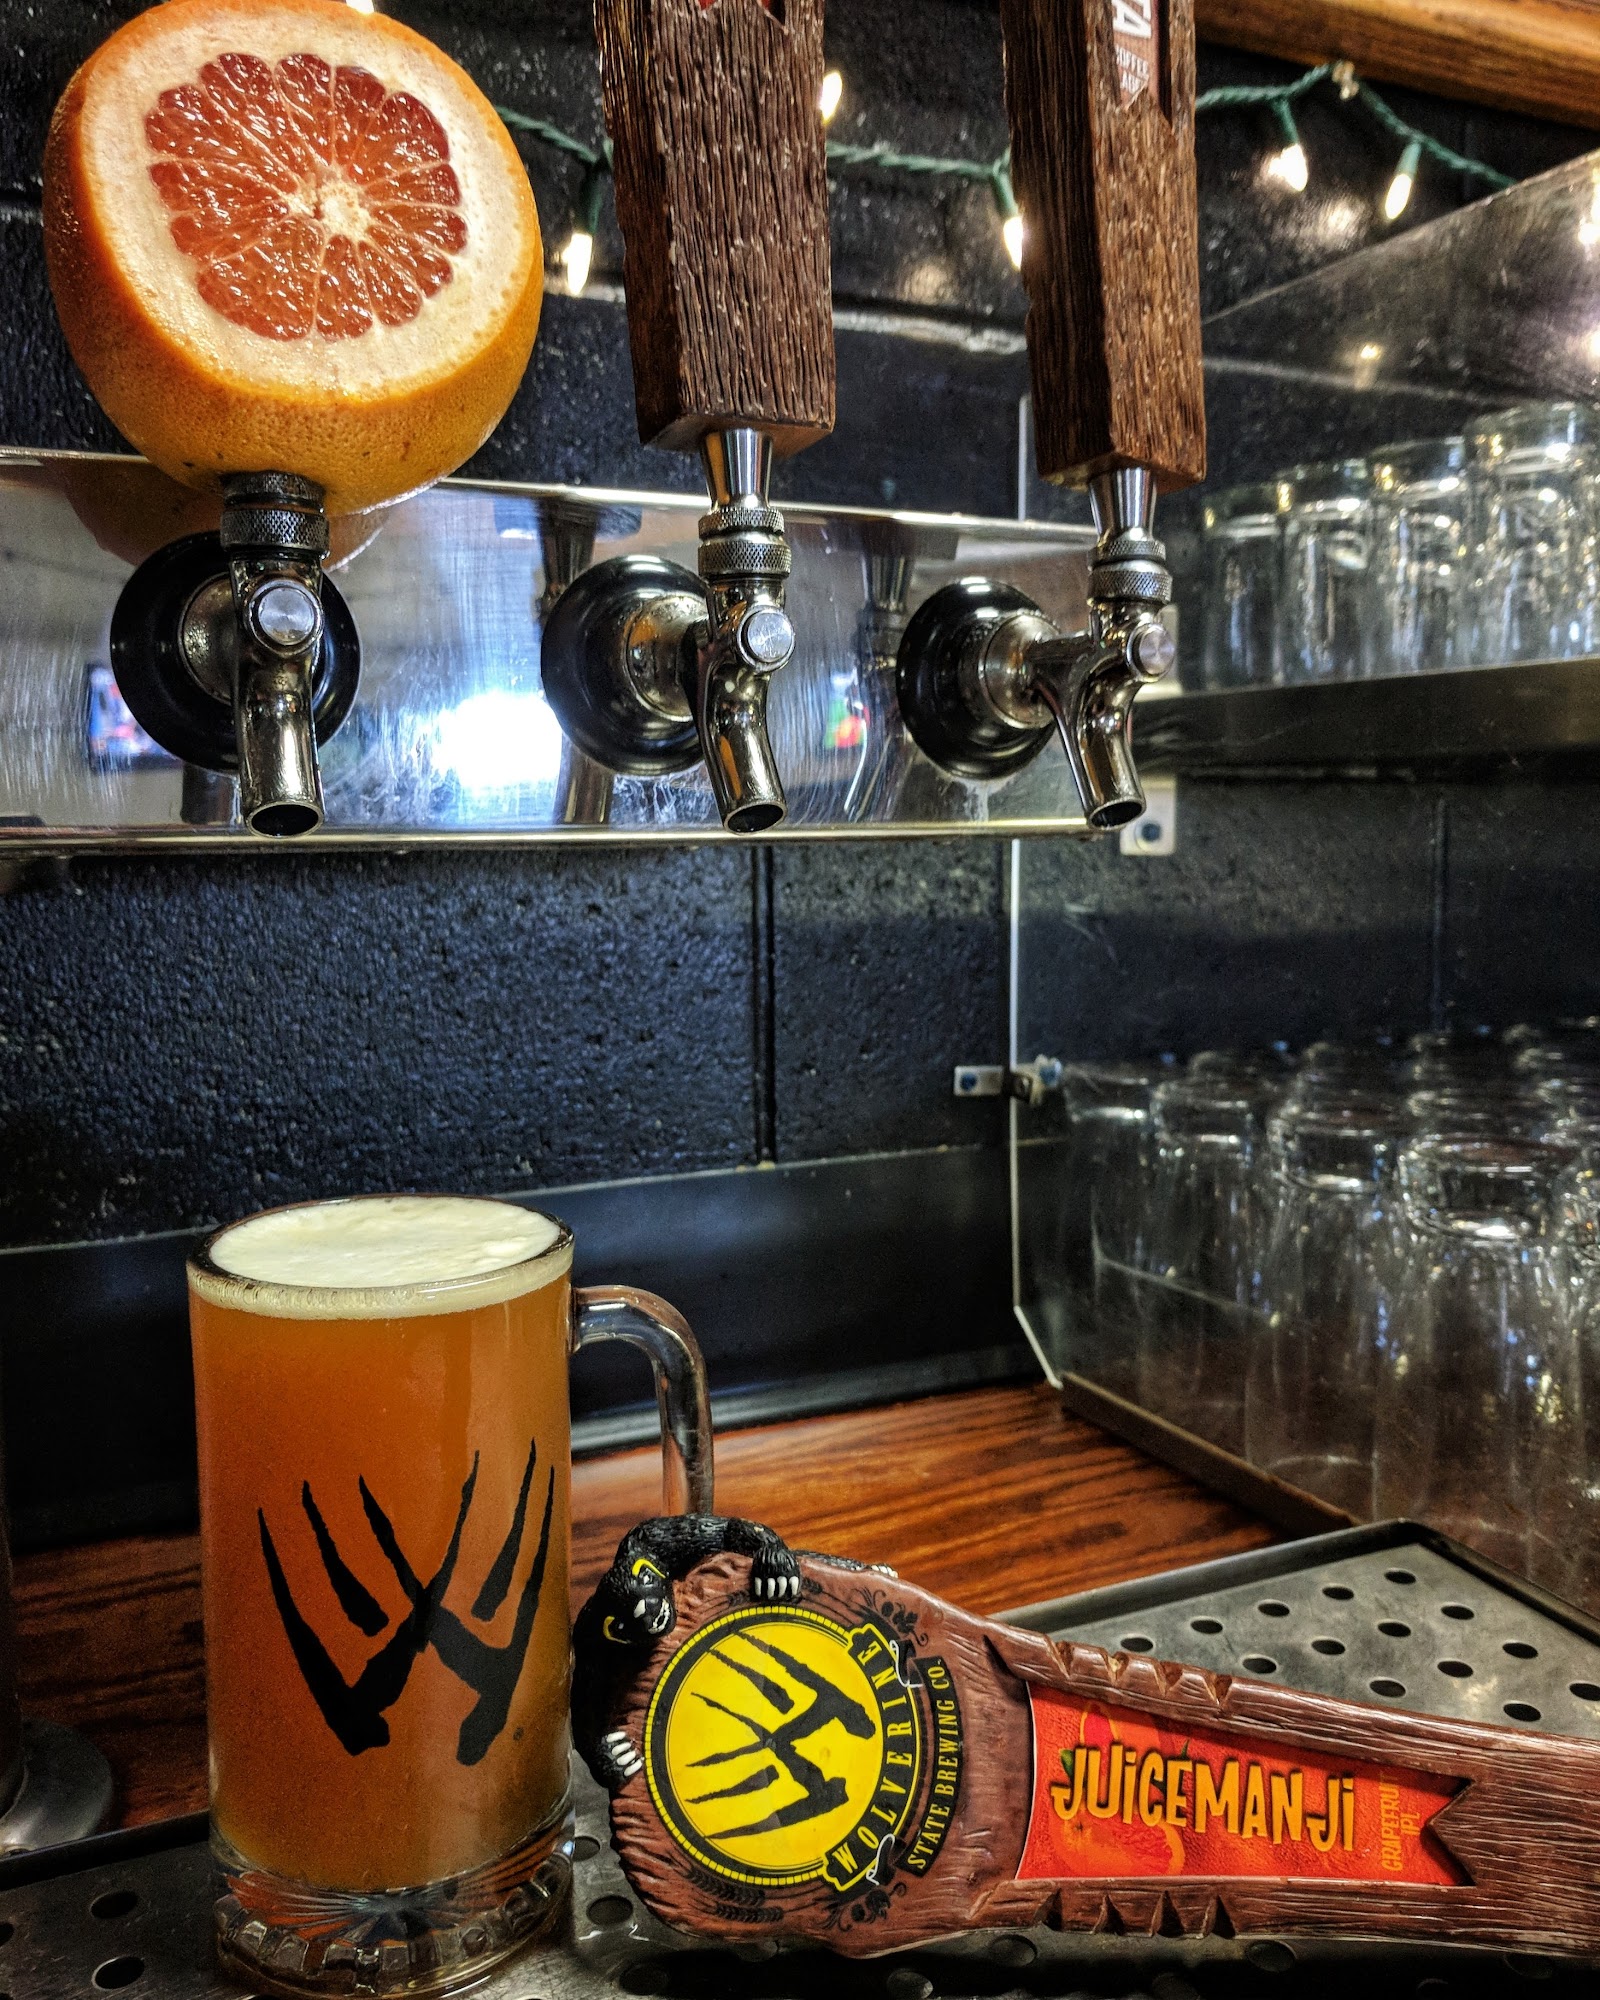 Wolverine State Brewing Co